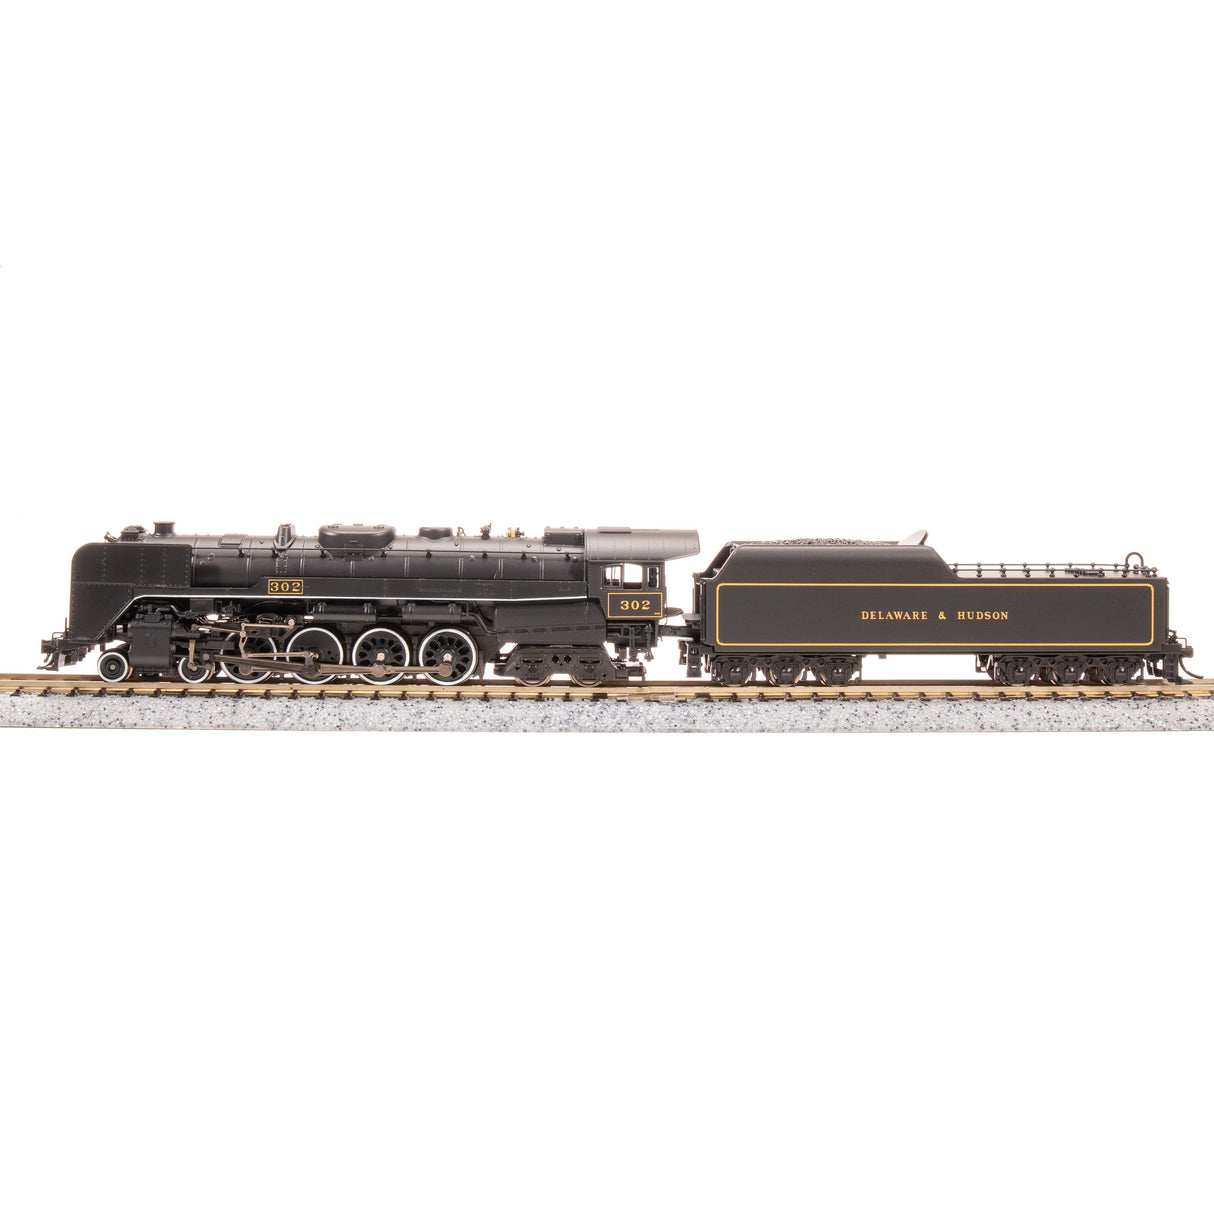 Broadway Limited N Scale Reading T-1 4-8-4 Steam Locomotive D&H Centennial #302 DC/DCC Southern